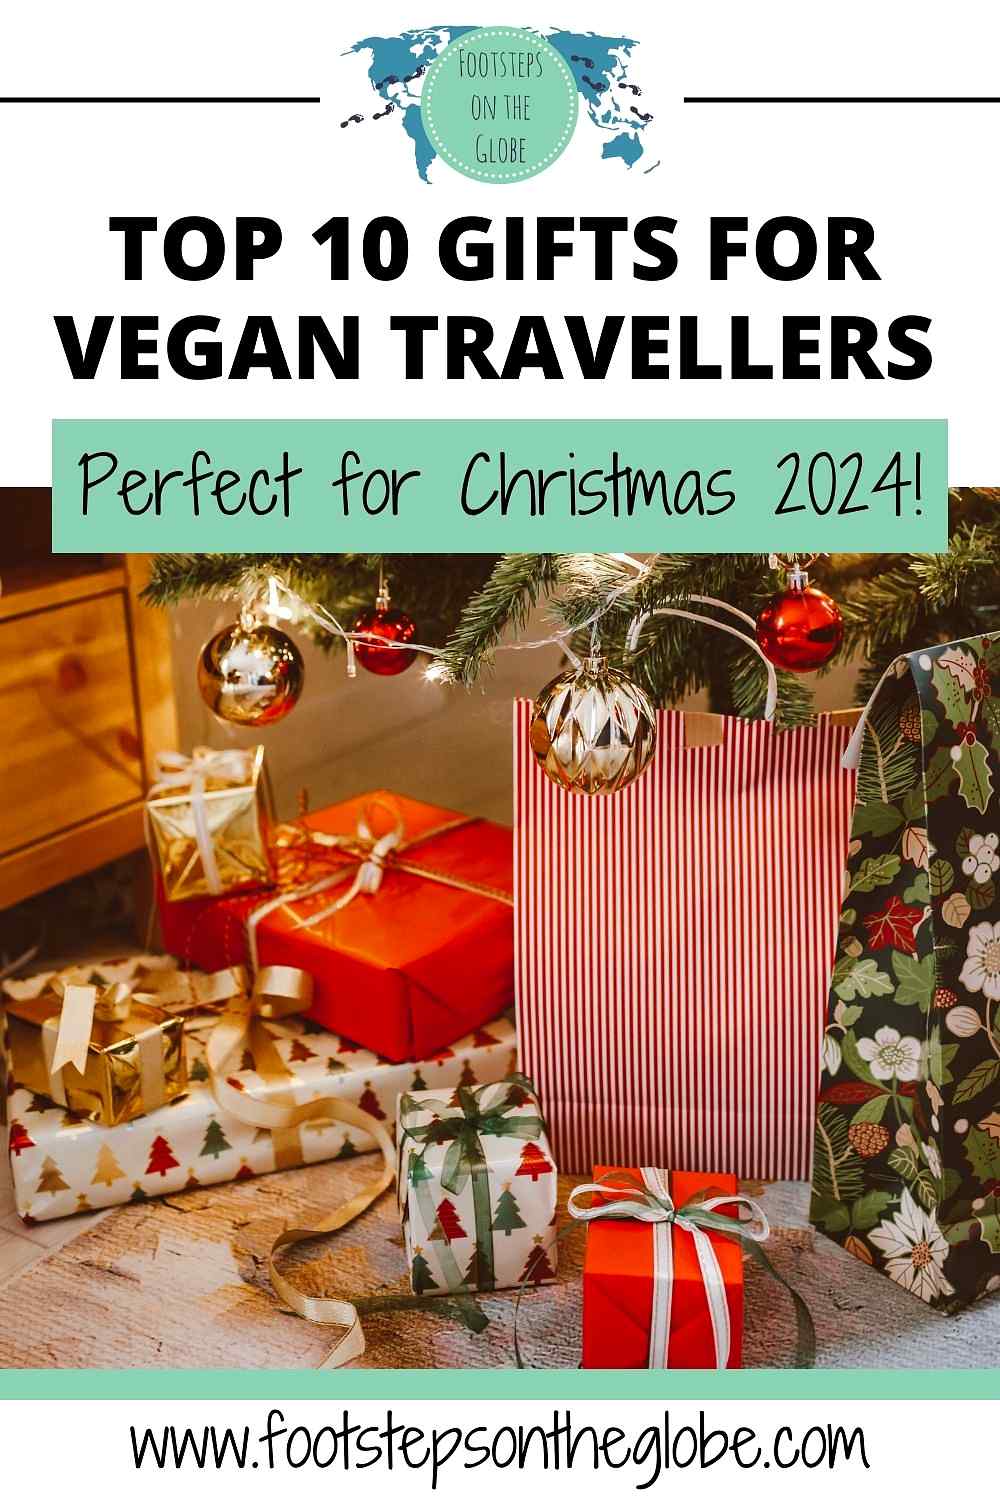 Pinterest image of red and green Christmas presents under a Christmas tree with the text: "Top 10 gifts for vegan travellers under 10 - perfect for Christmas 2024!"